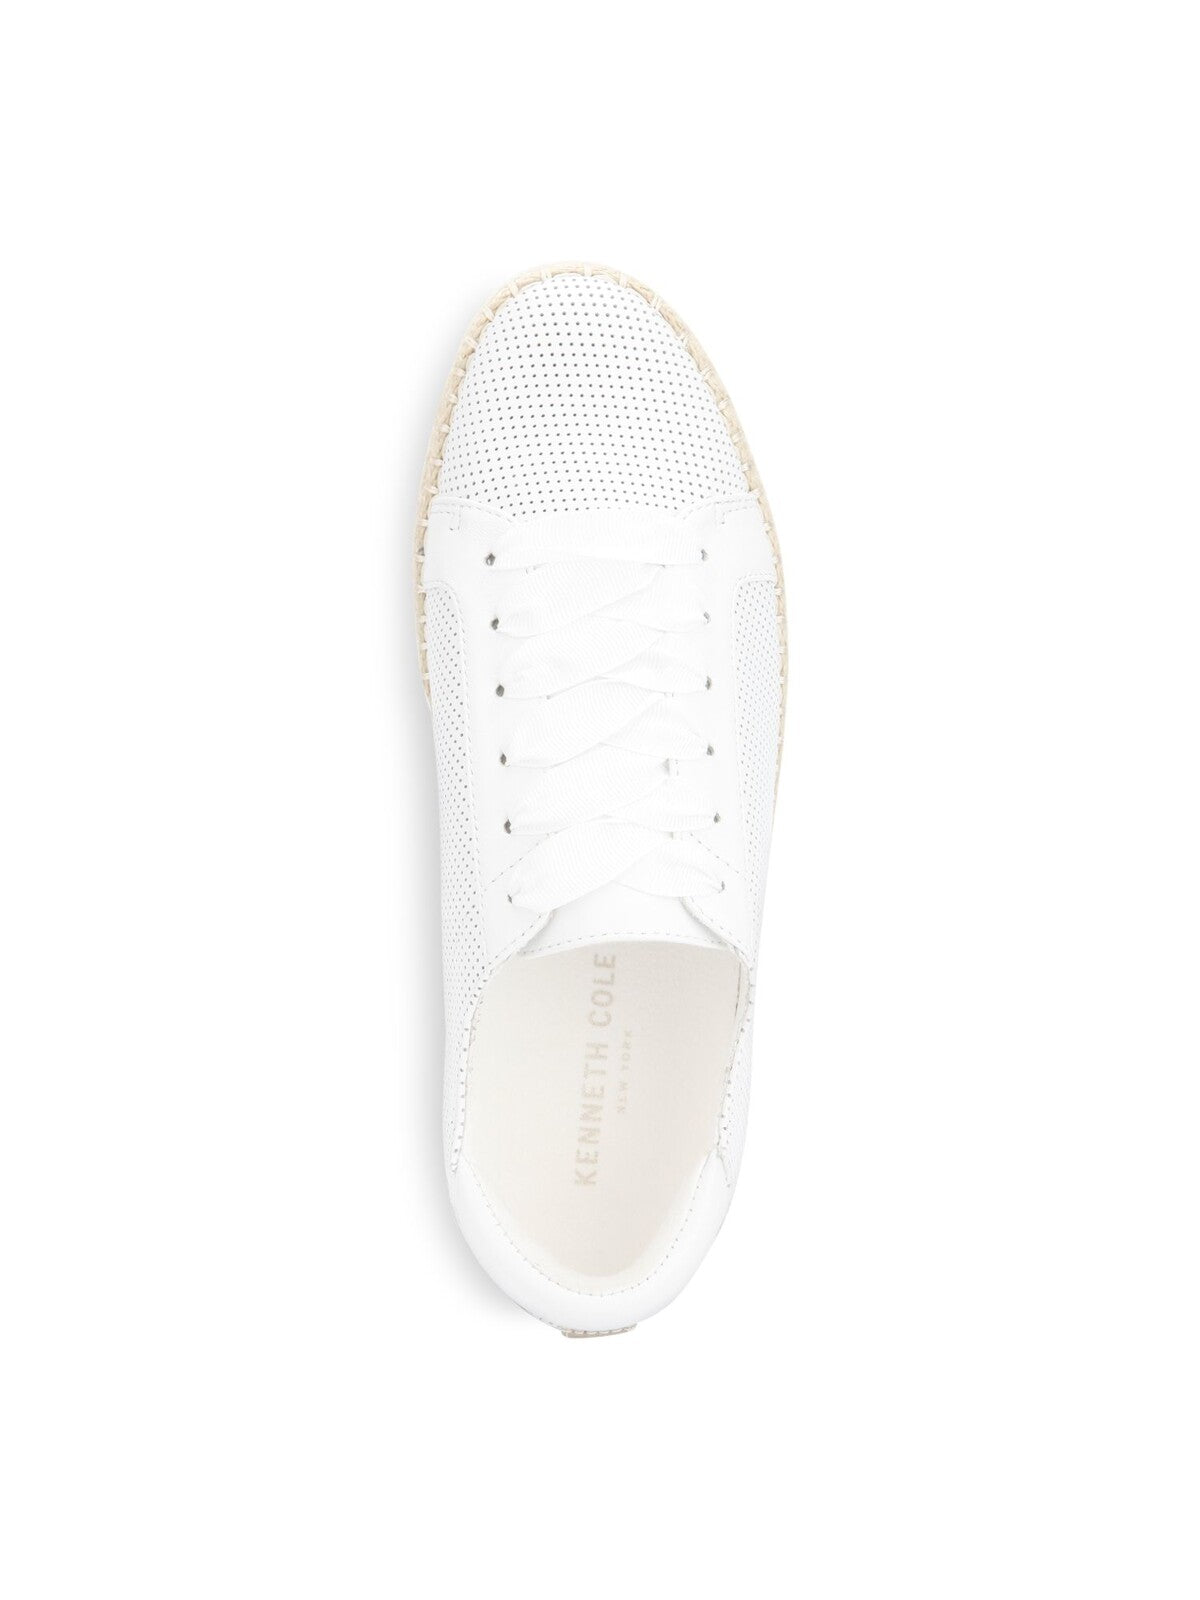 KENNETH COLE NEW YORK Womens White Espadrille Wrap Perforated Cushioned Kamspadrille Round Toe Platform Lace-Up Leather Athletic Sneakers Shoes M